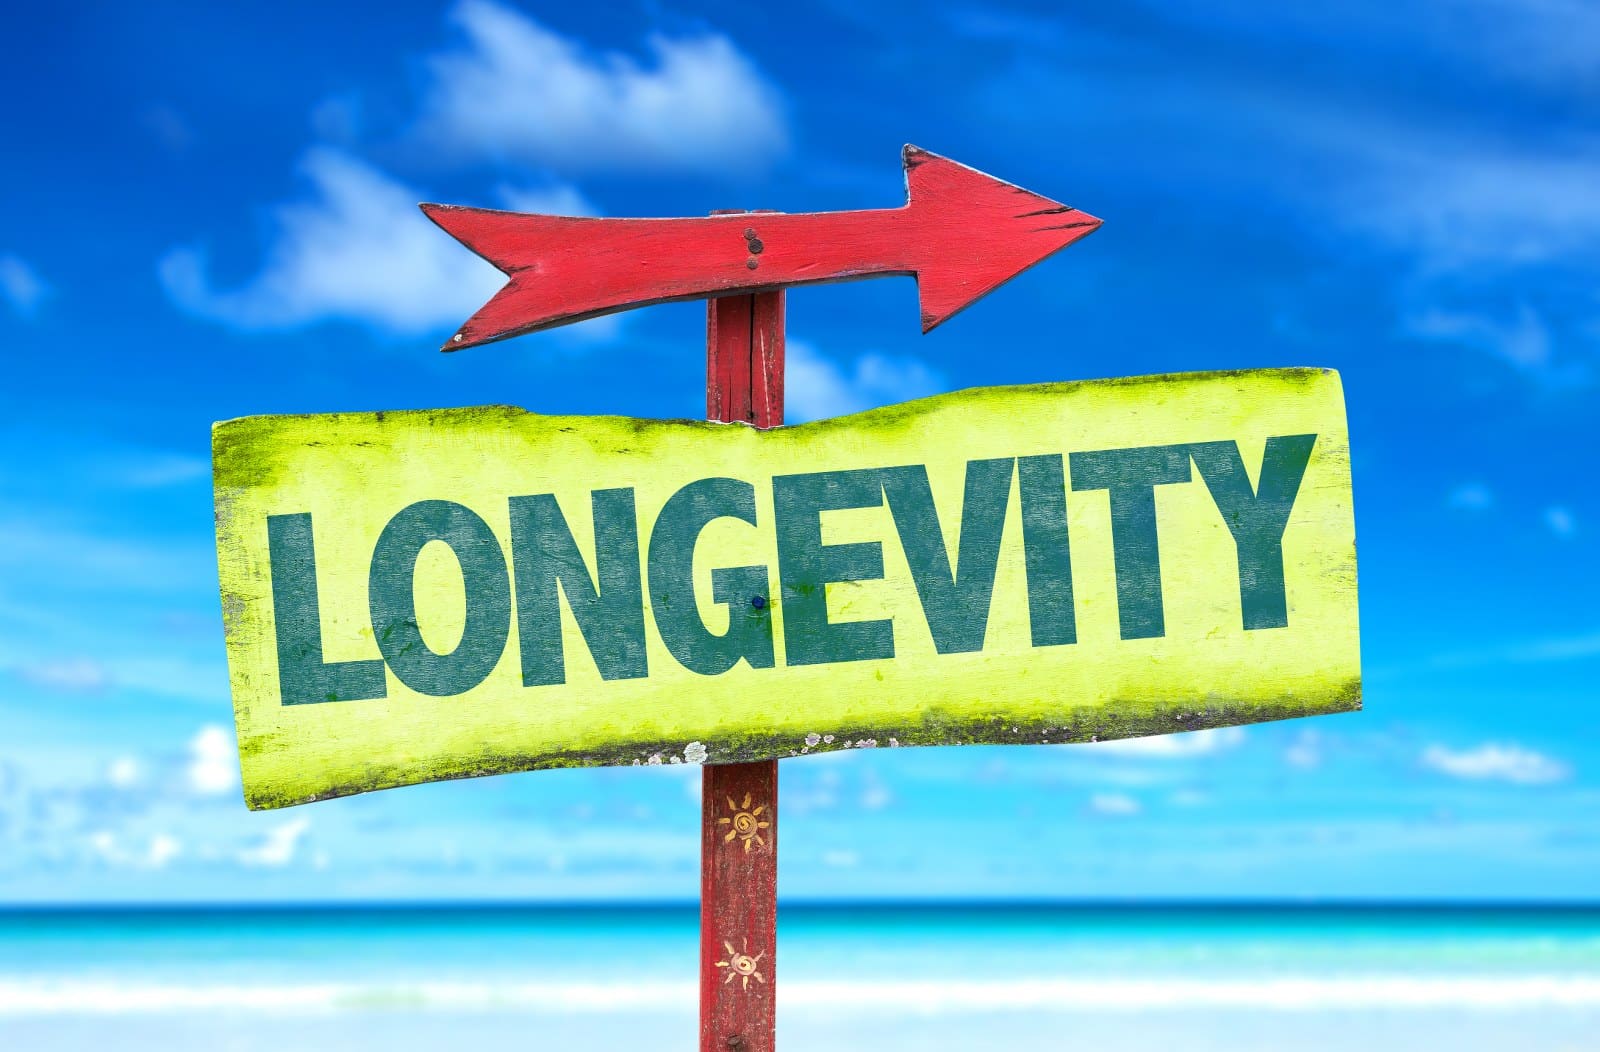 longevity green sign on a beach with red arrow above it